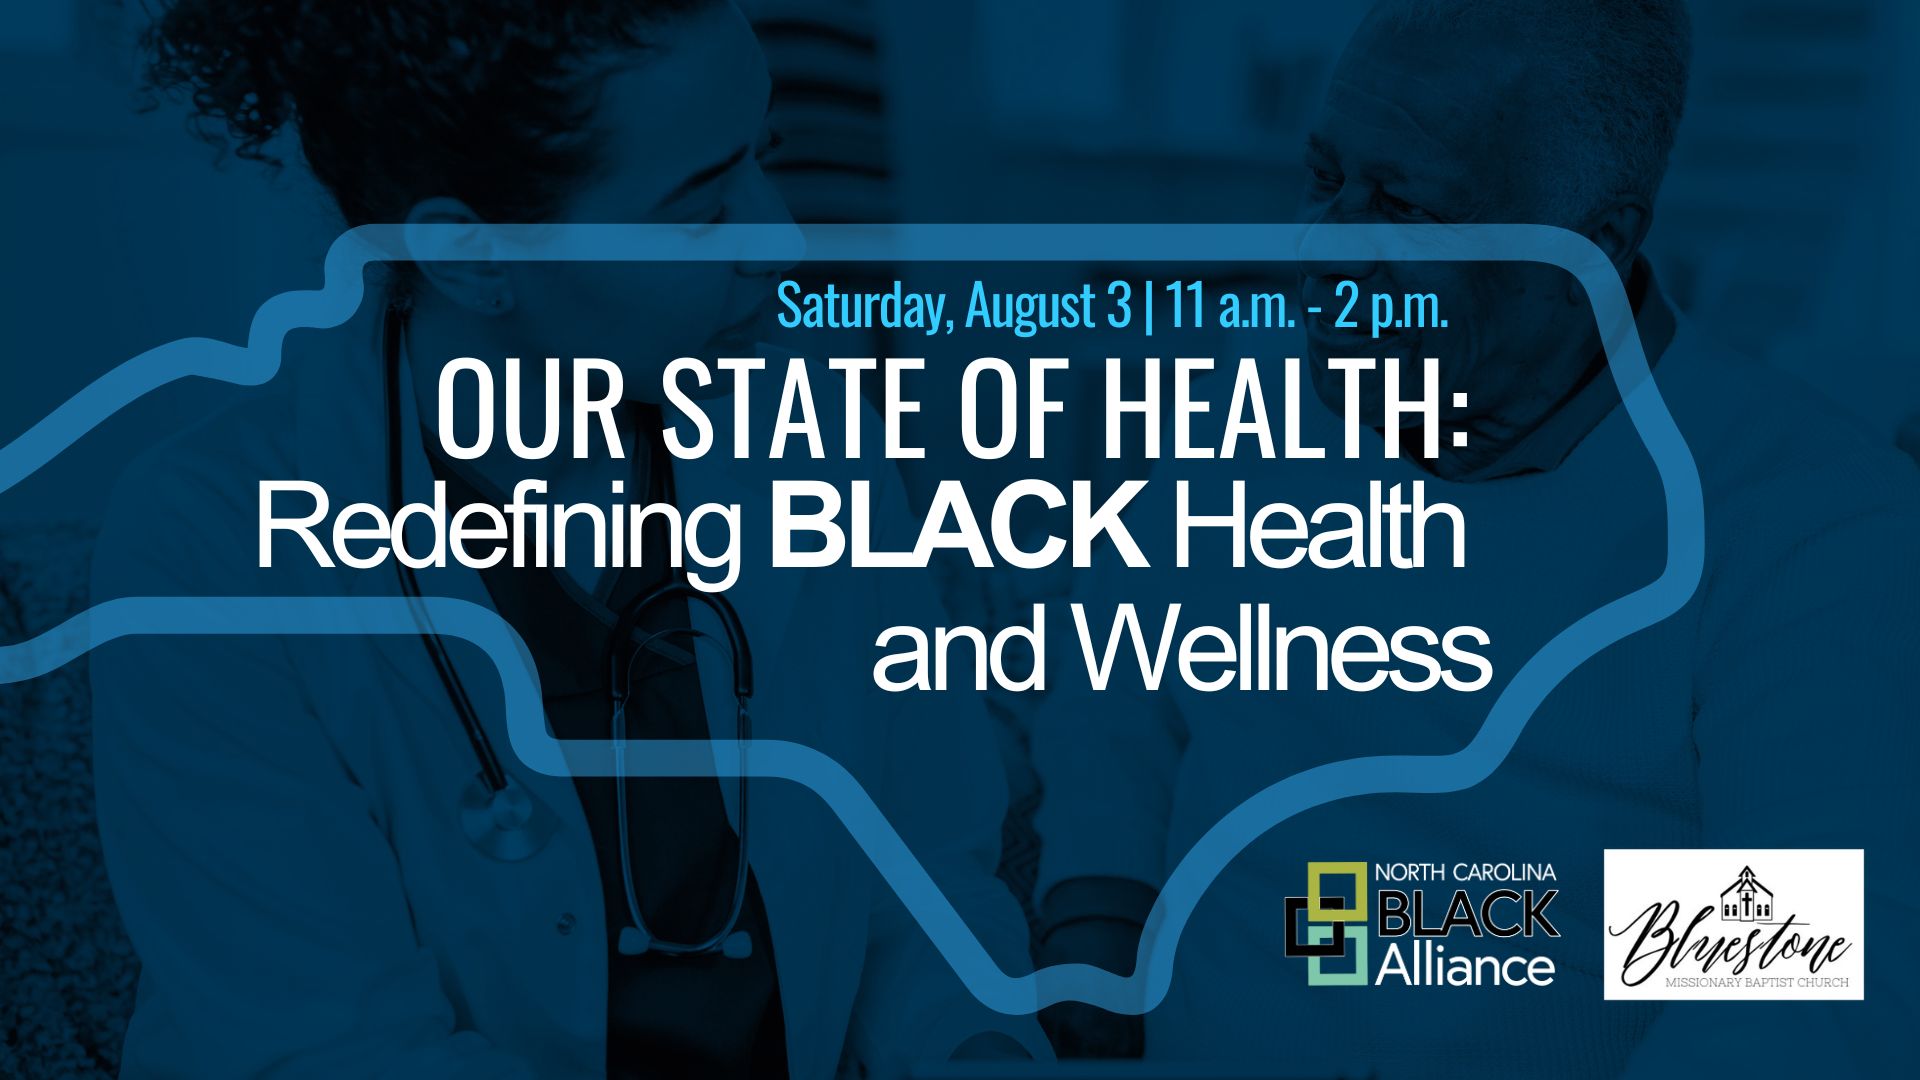 UR State of Health: Redefining Black Health and Wellness